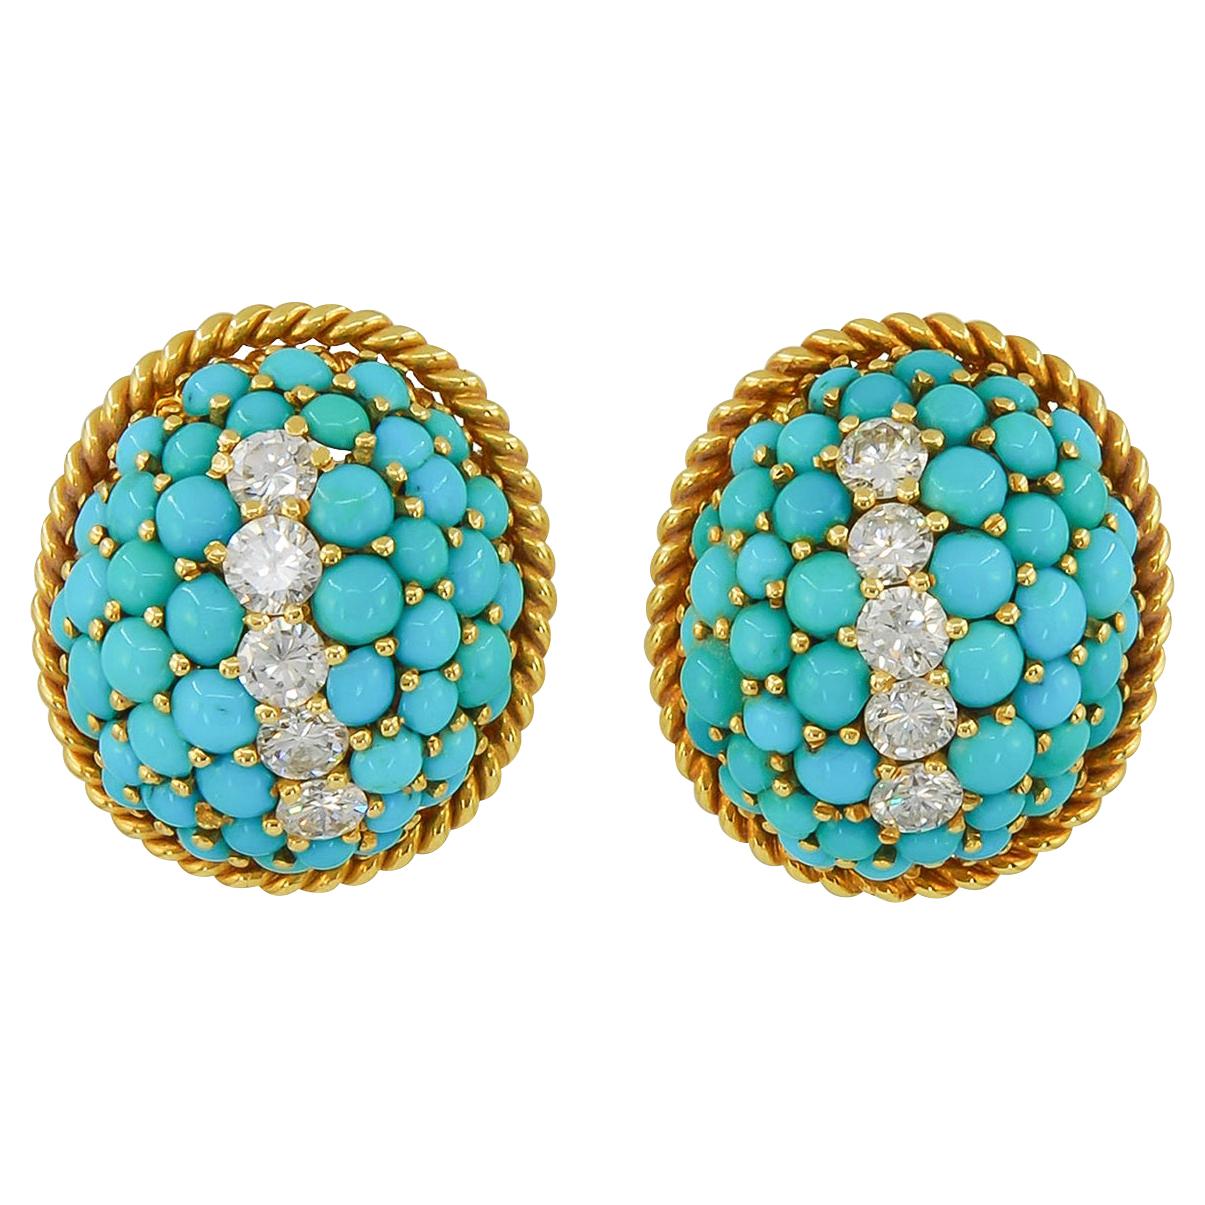 Turquoise Yellow Gold Retro Style Striped Dome Earrings